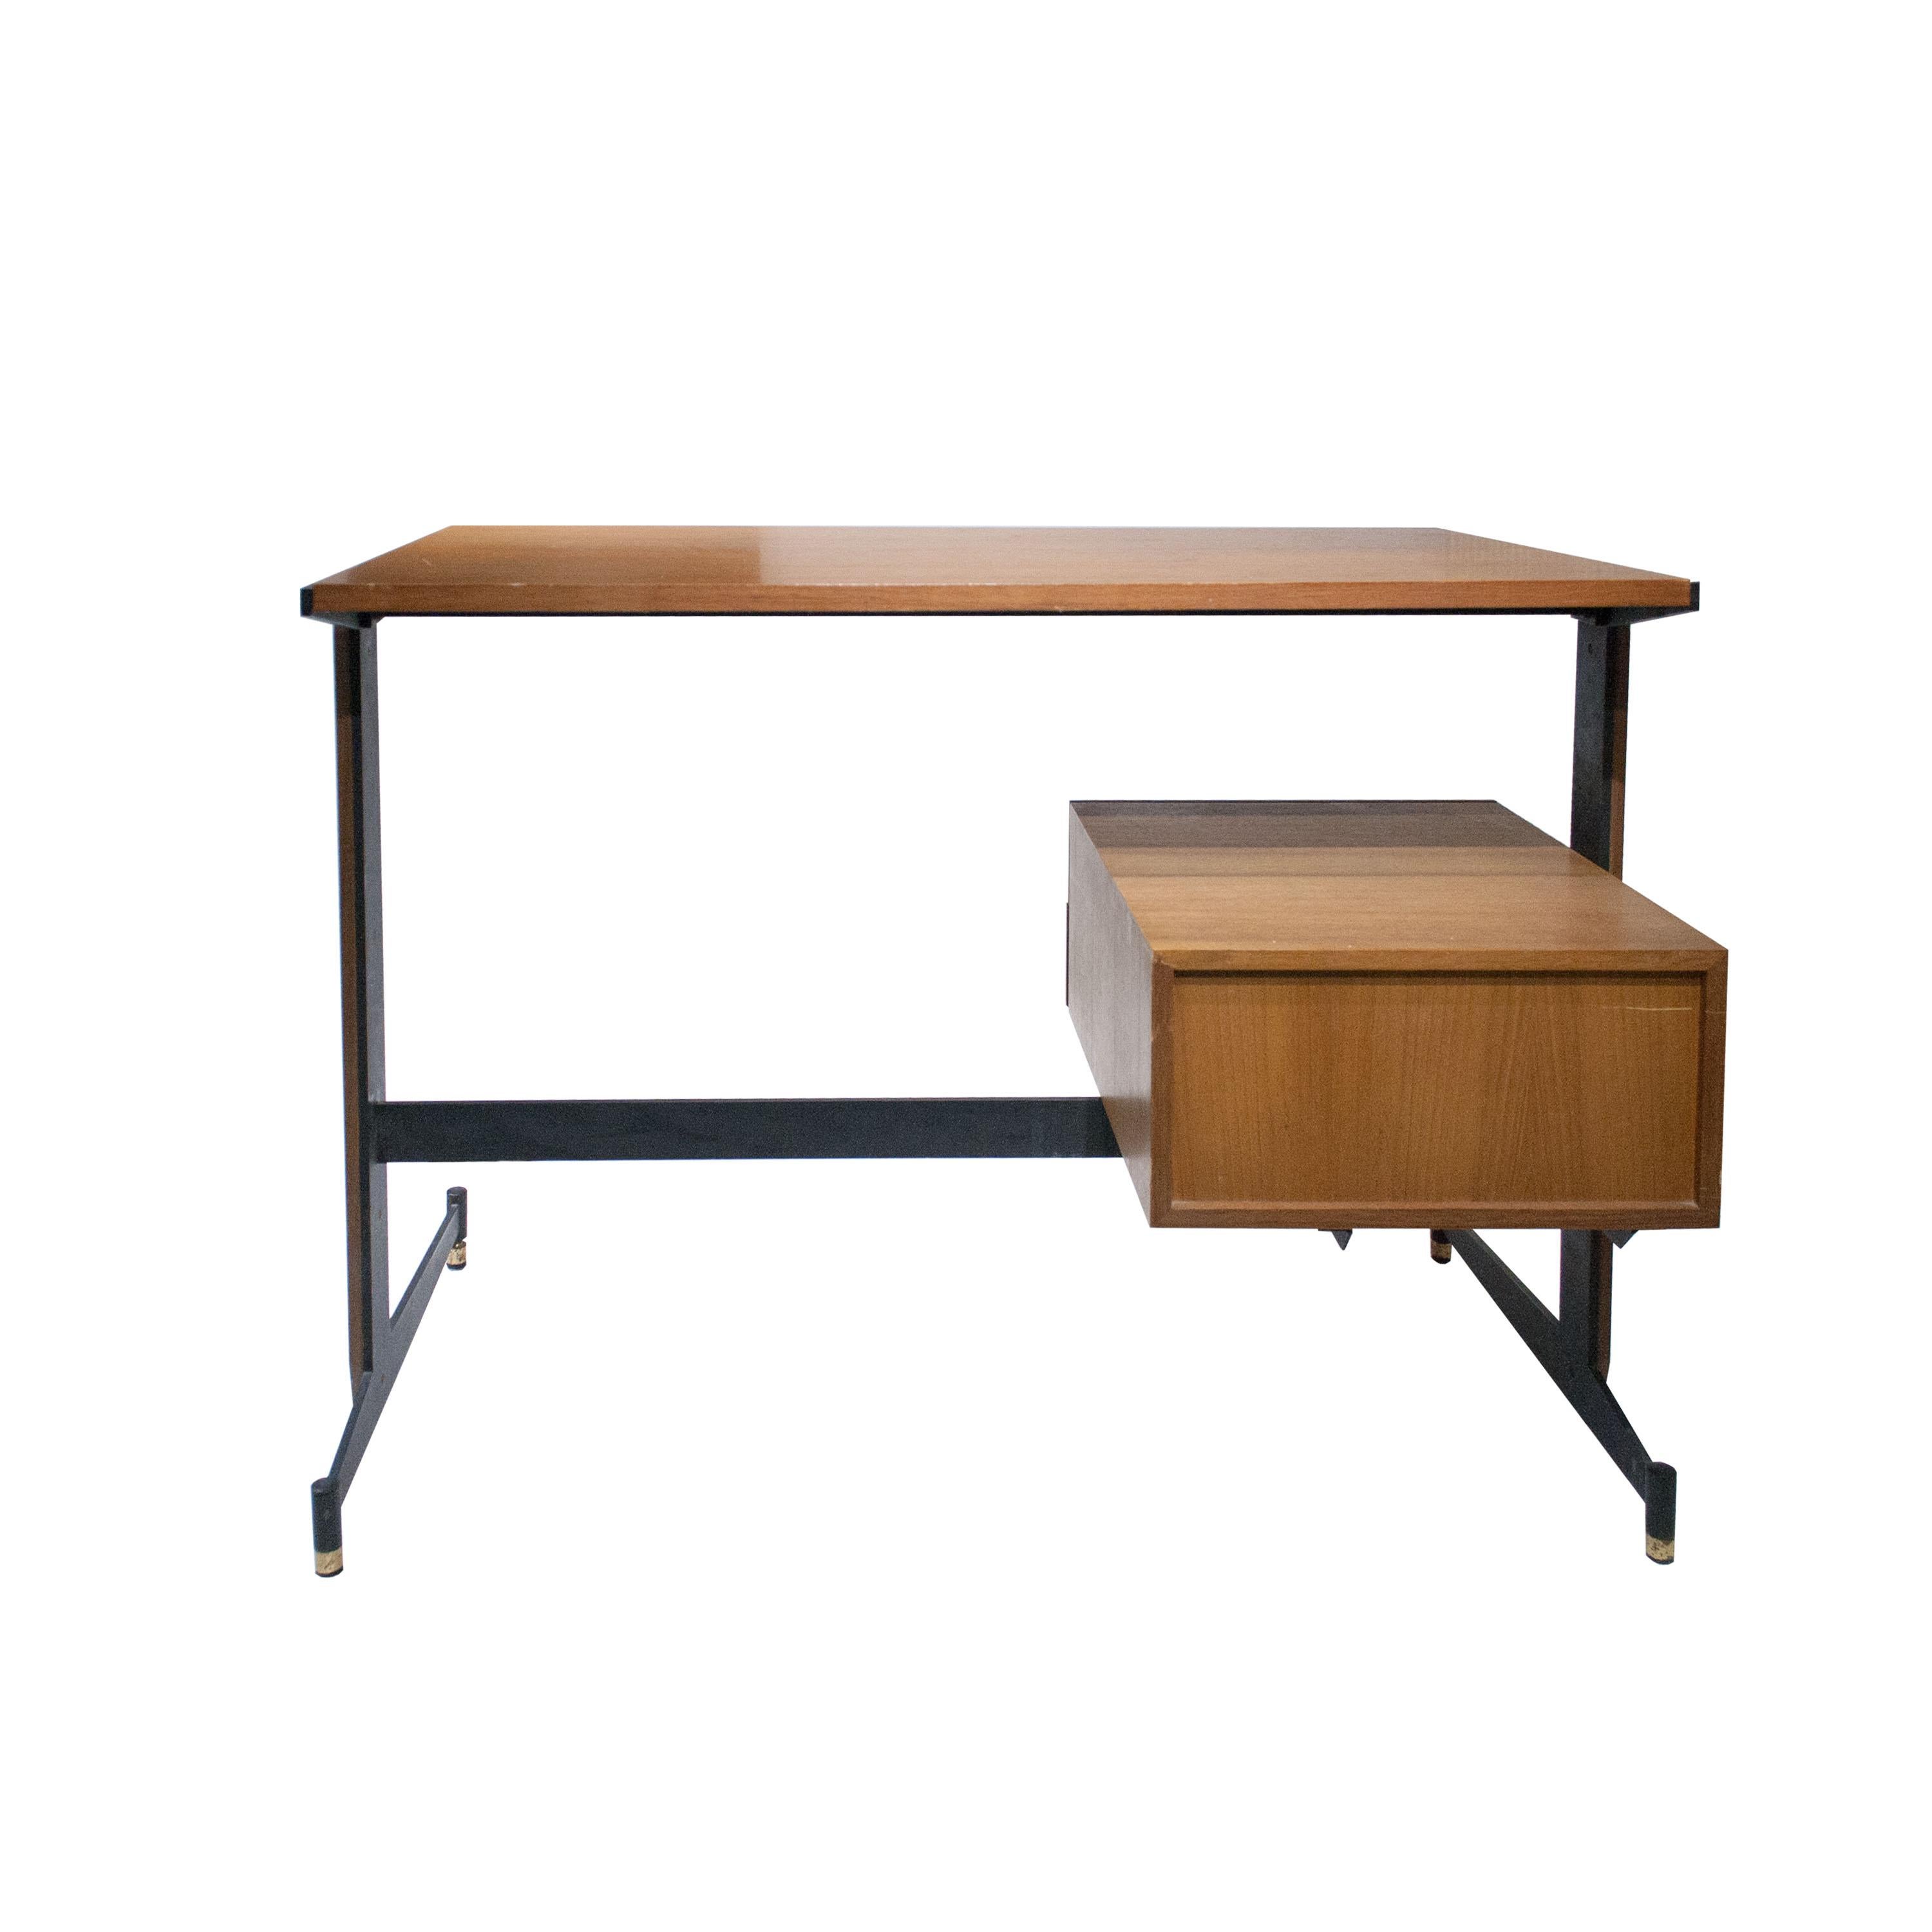 1950's original modern desk composed of a table and 2 drawers module made of teak wood over a black lacquered steel structure with brass details on legs.